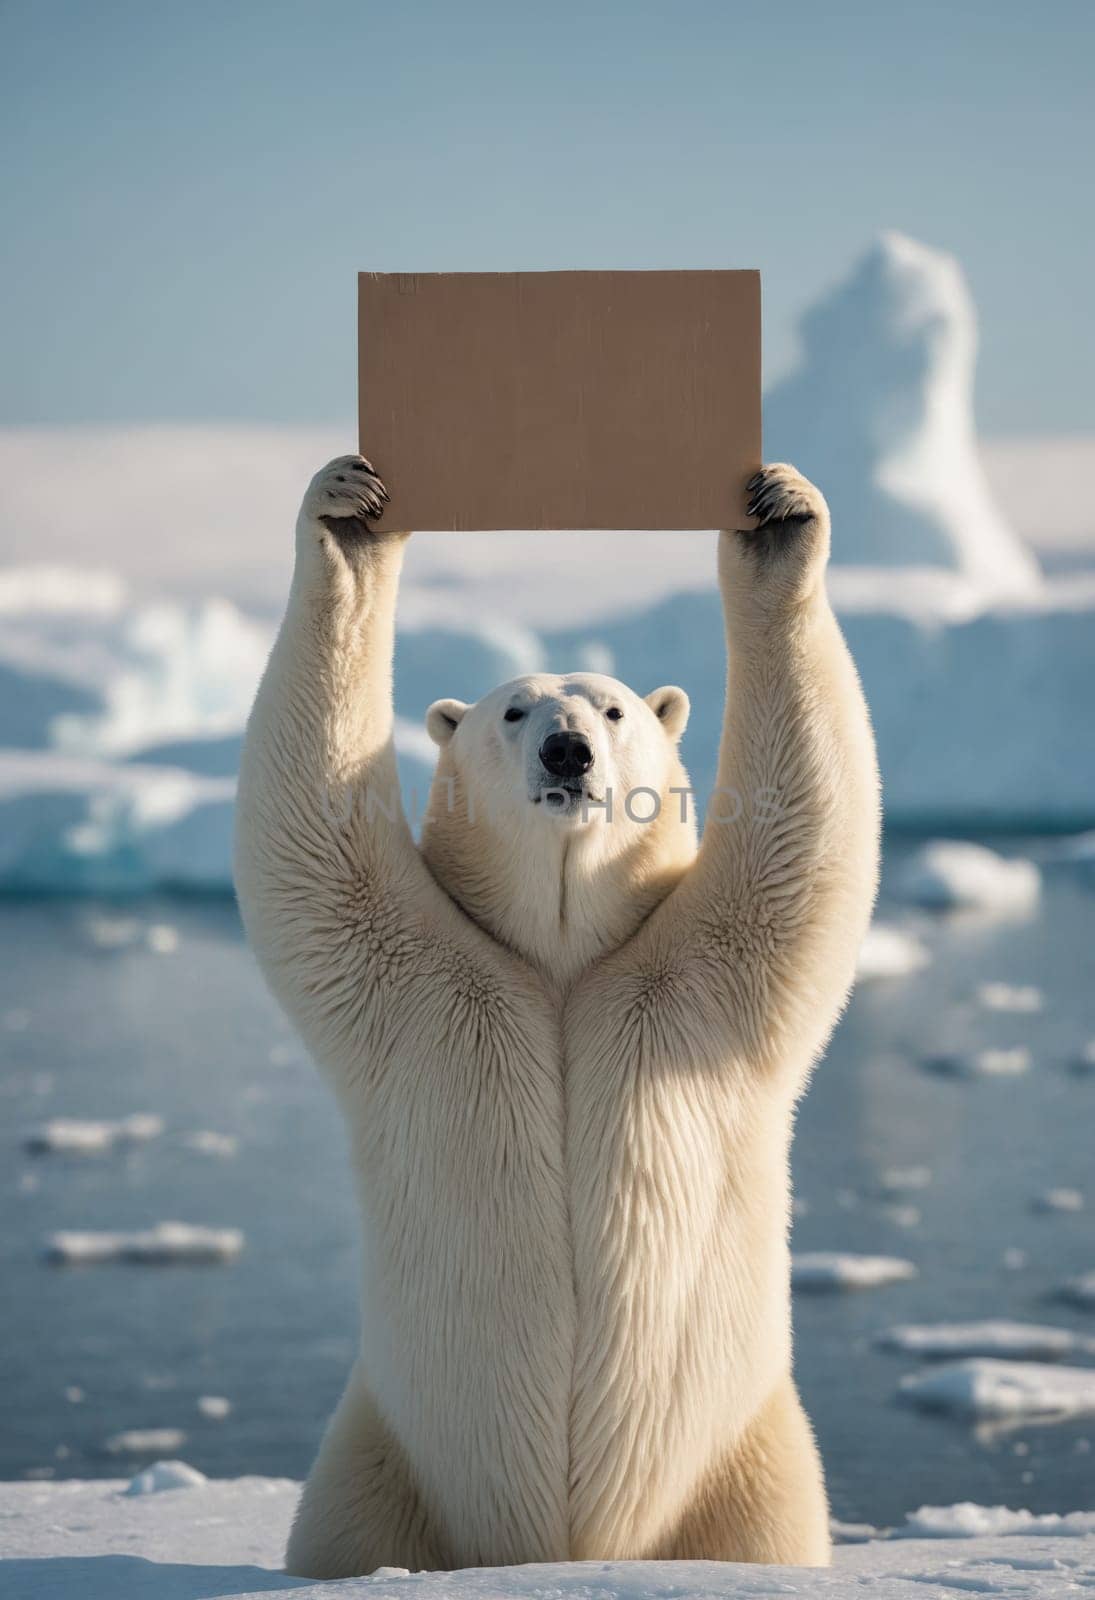 A carnivore polar bear holds a cardboard sign under the sky on the polar ice cap, seeking liquid to drink from the Arctic ocean